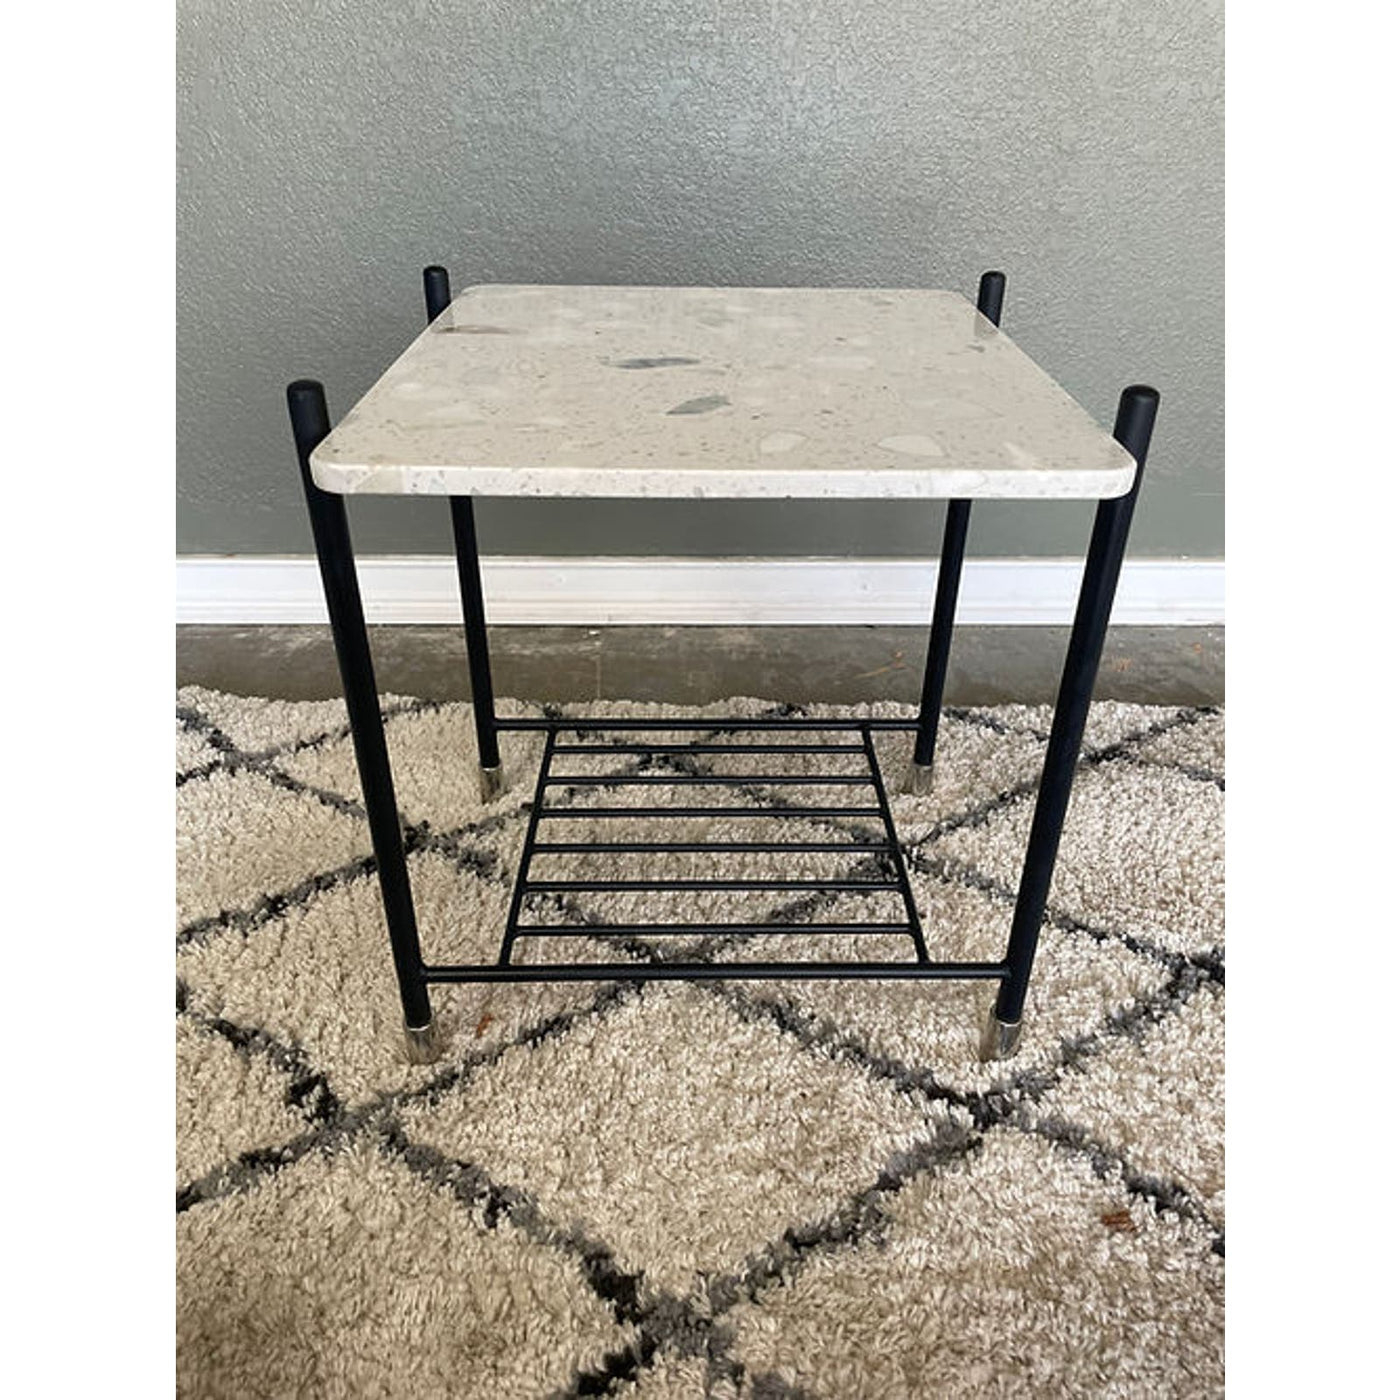 Four Hands Bishop Mona Terrazzo End Table